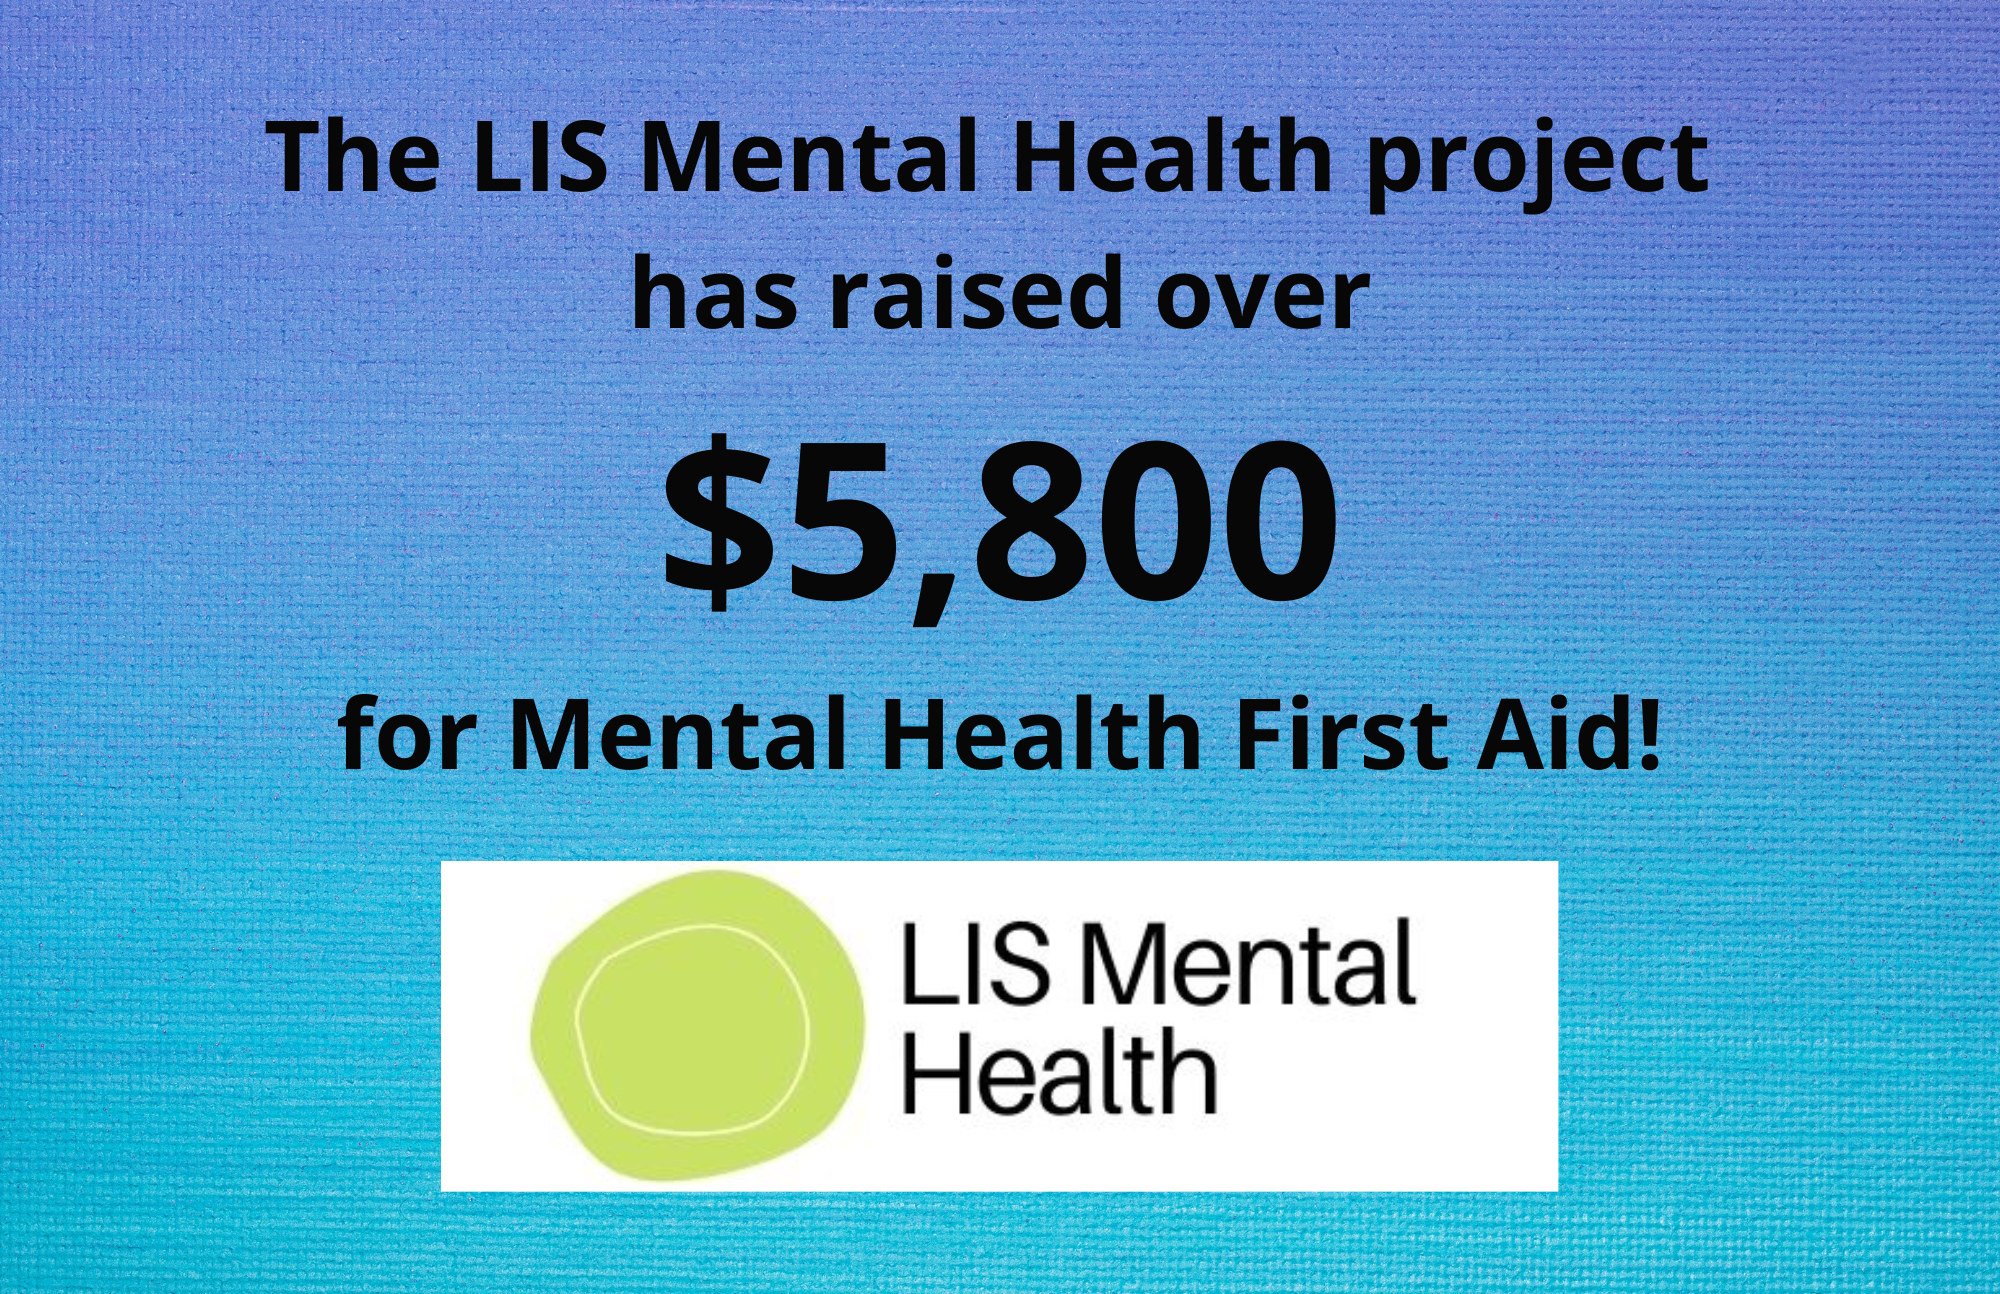 flyer with text reading "The LIS Mental Health project has raised over $5,800 for Mental Health First Aid". At the bottom is the logo for LIS Mental Health